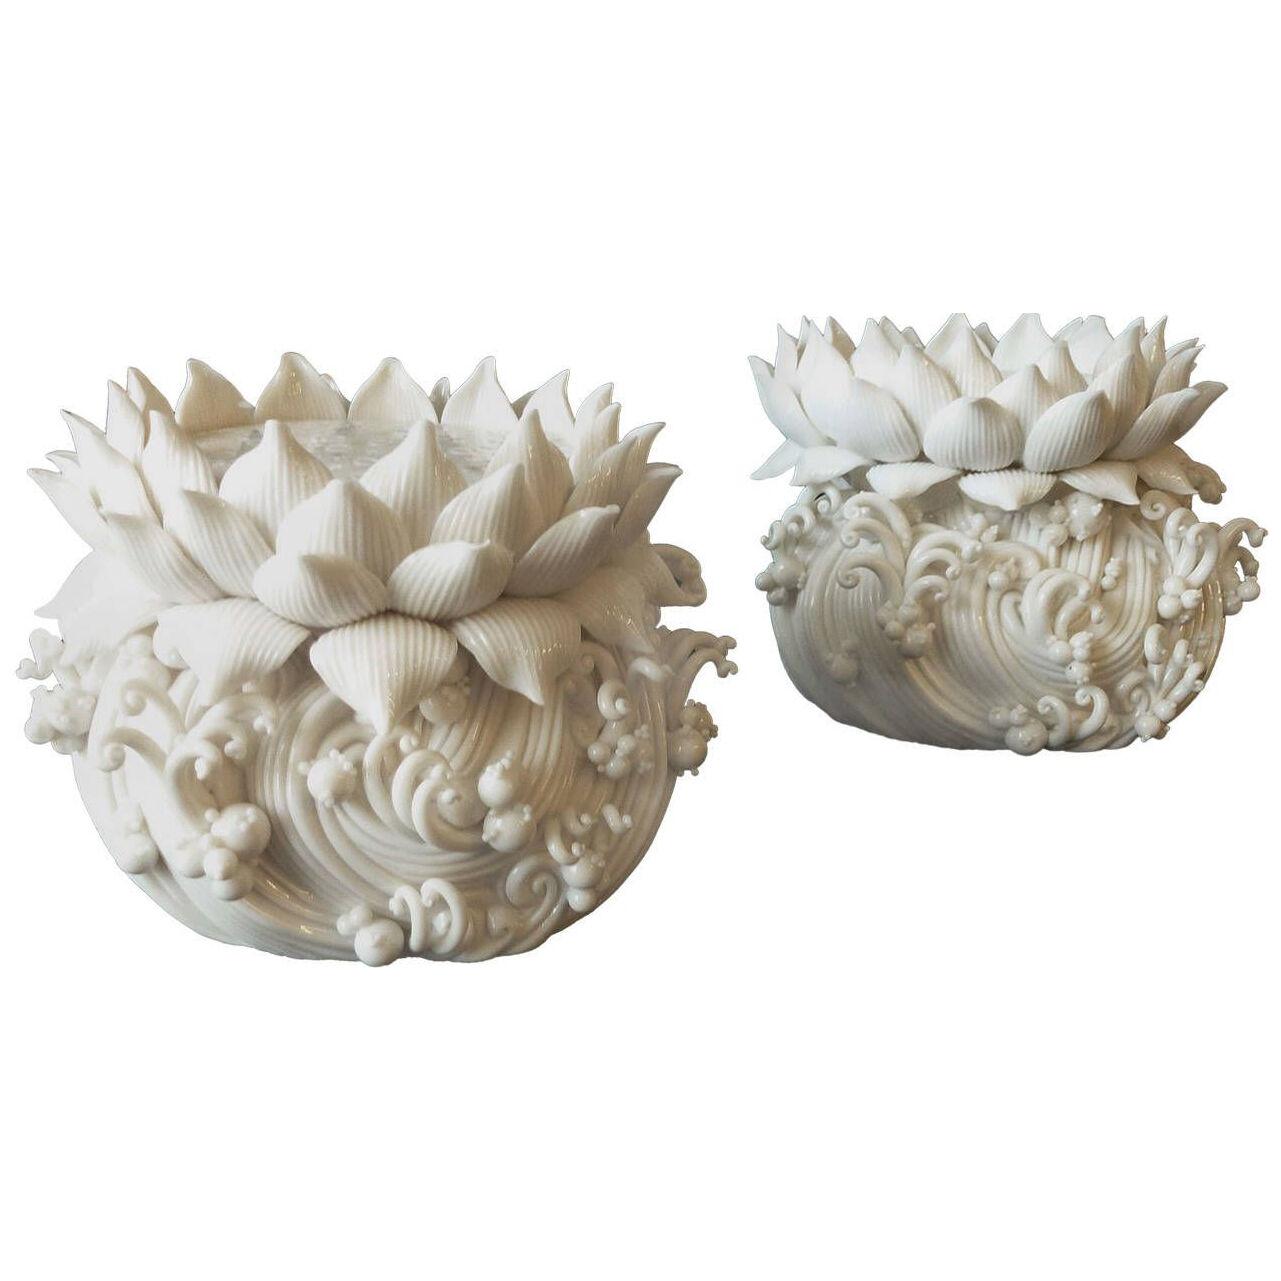 A pair of Lotus candle holders